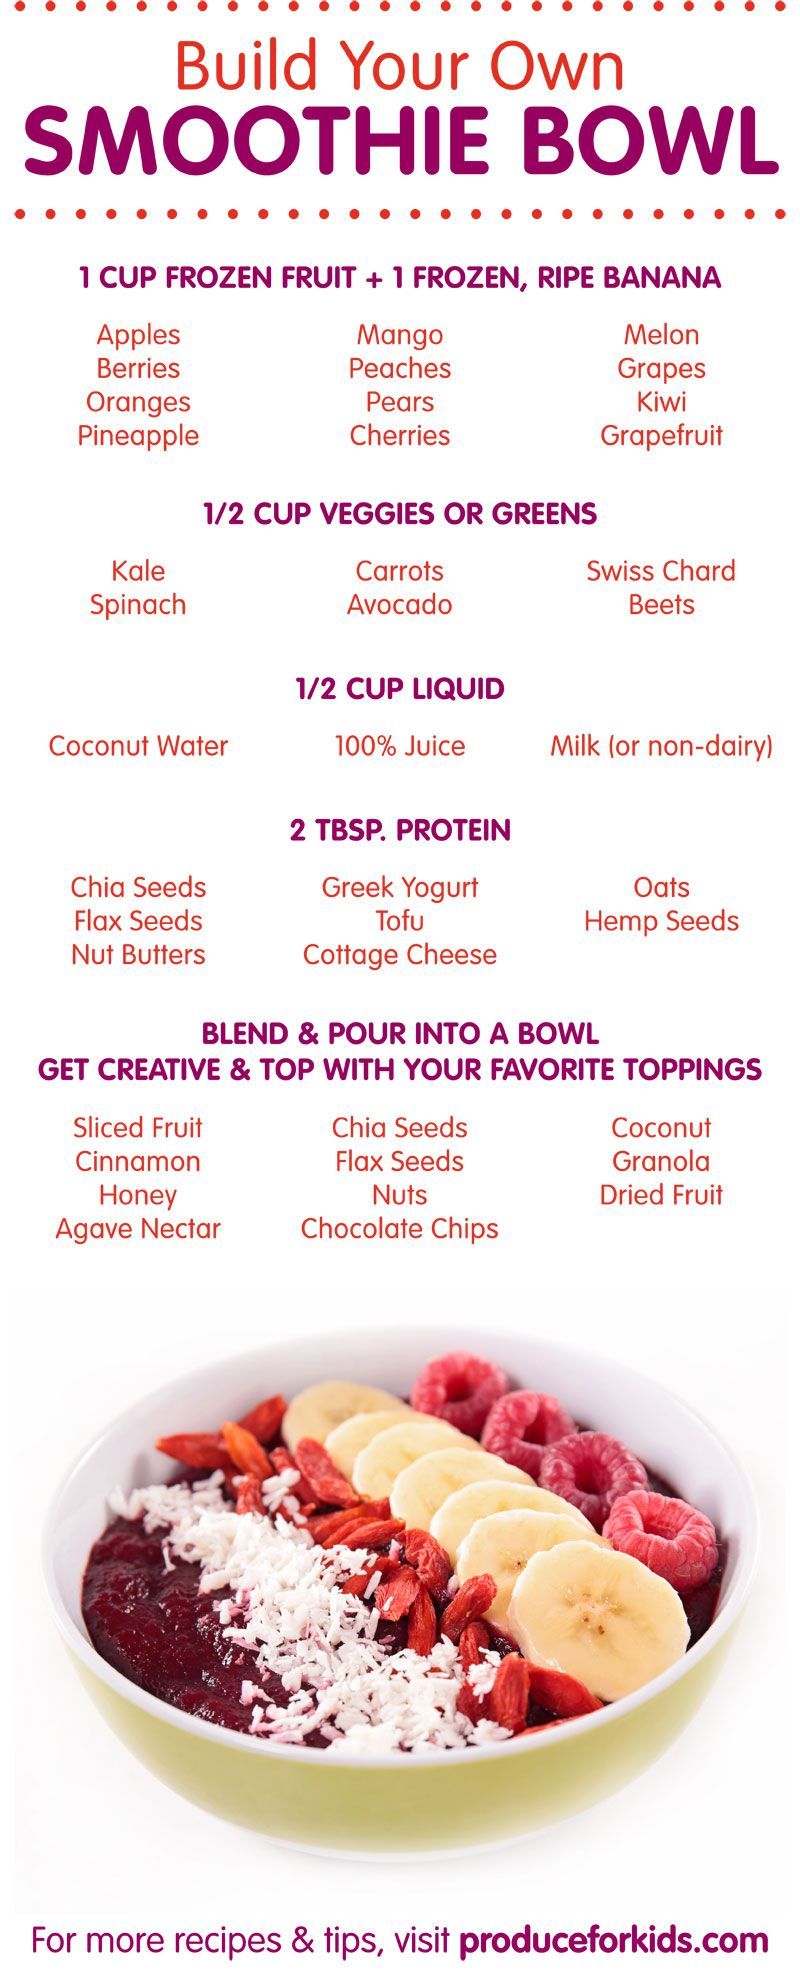 Build Your Own Smoothie Bowl - a helpful step-by-step guide with tons of possible